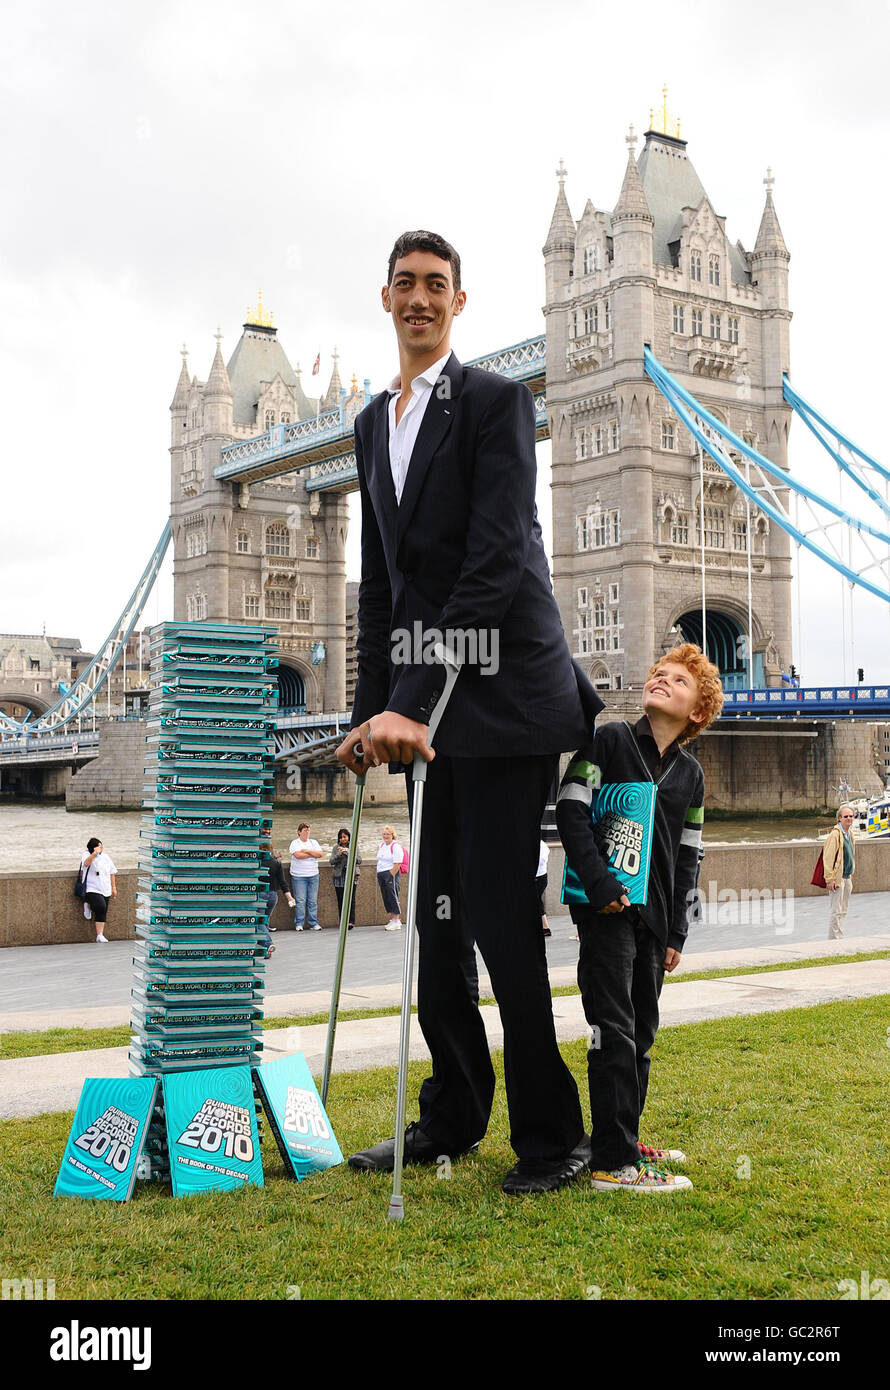 Sultan Kosen, from Turkey, stands next to Josh Henderson, from West Horsley, as he is announced as the Guinness World Records Tallest Man standing at 8ft 1, seen in Potters Field in London. Stock Photo